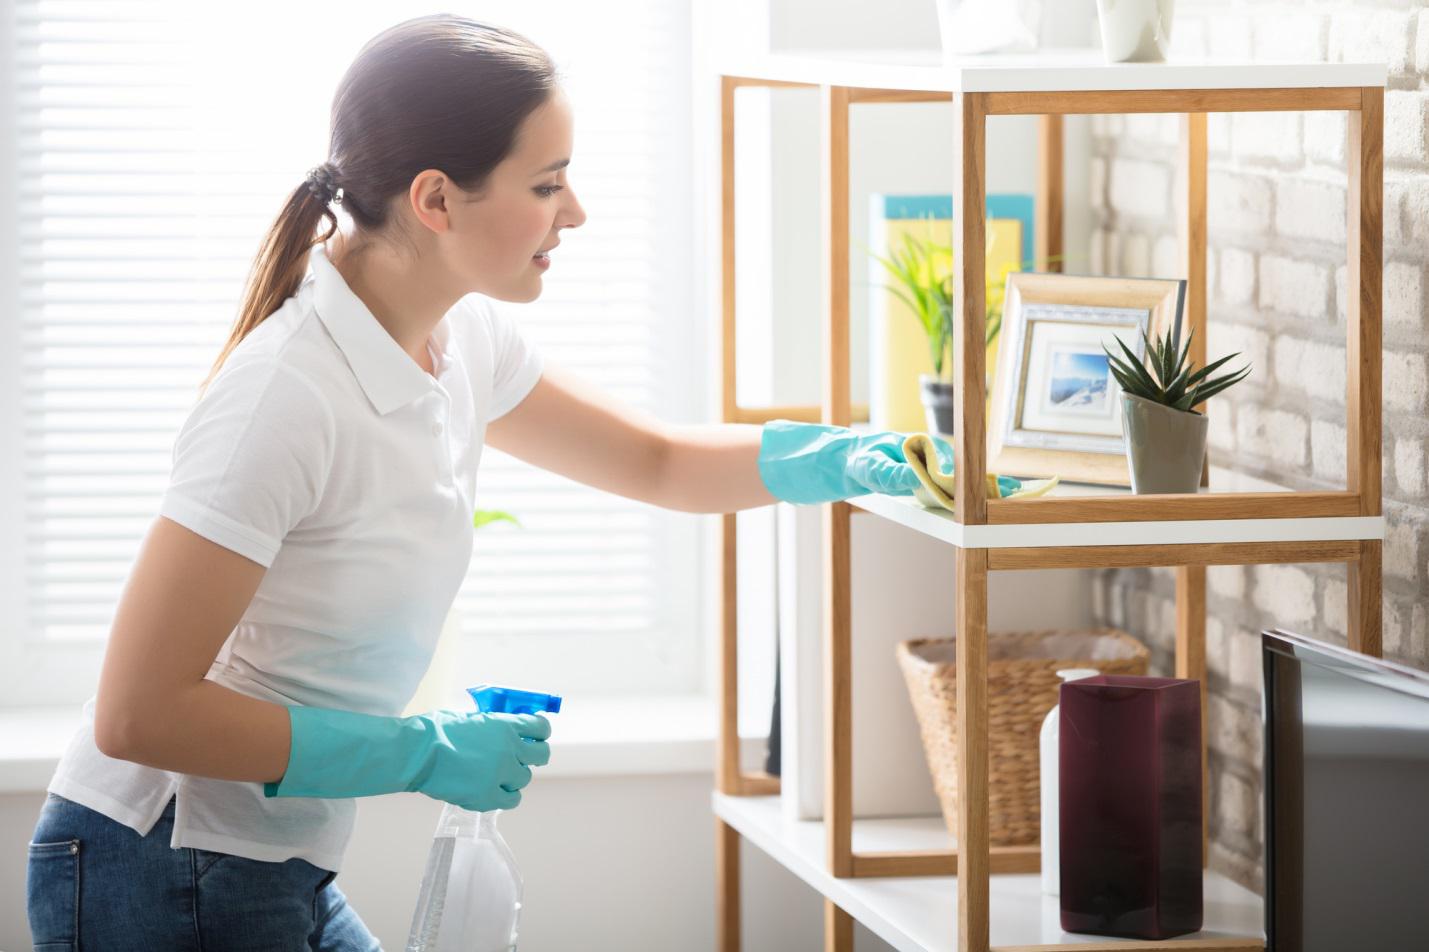 The Mental Health Benefits of a Clean House